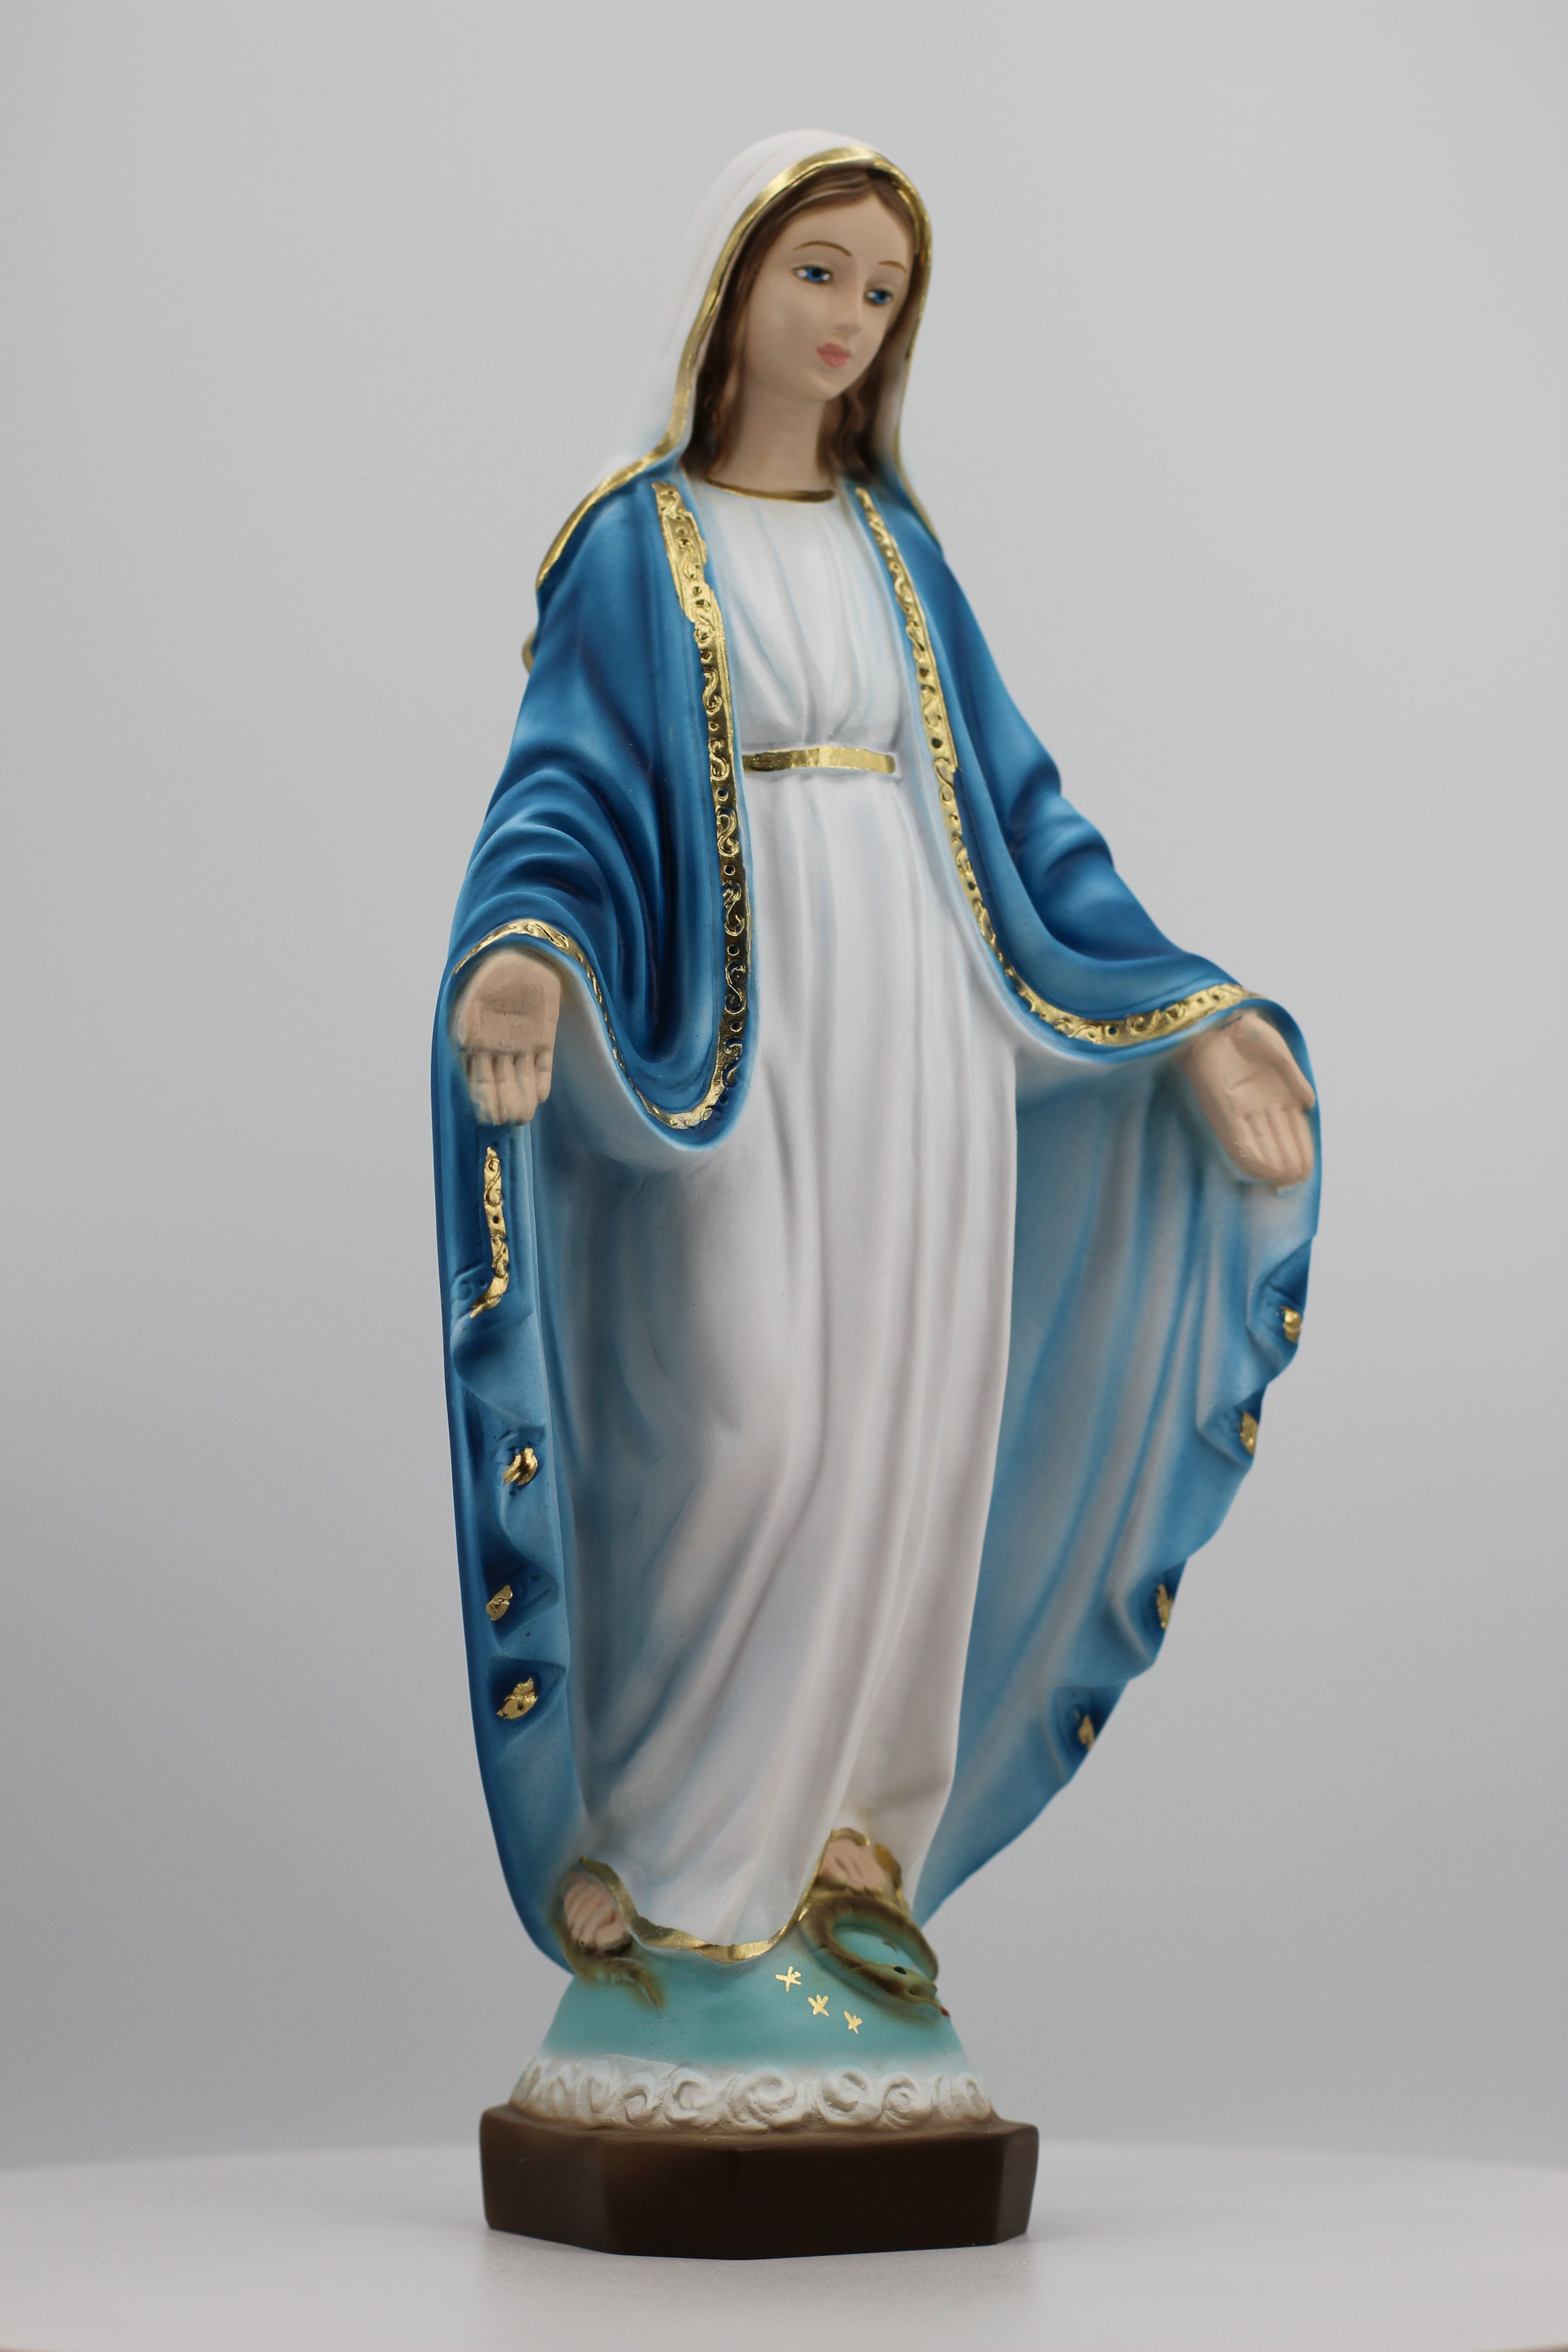 Nuestra Señora de la Medalla Milagrosa  Blessed mother mary, Virgin mary  statue, Blessed mother